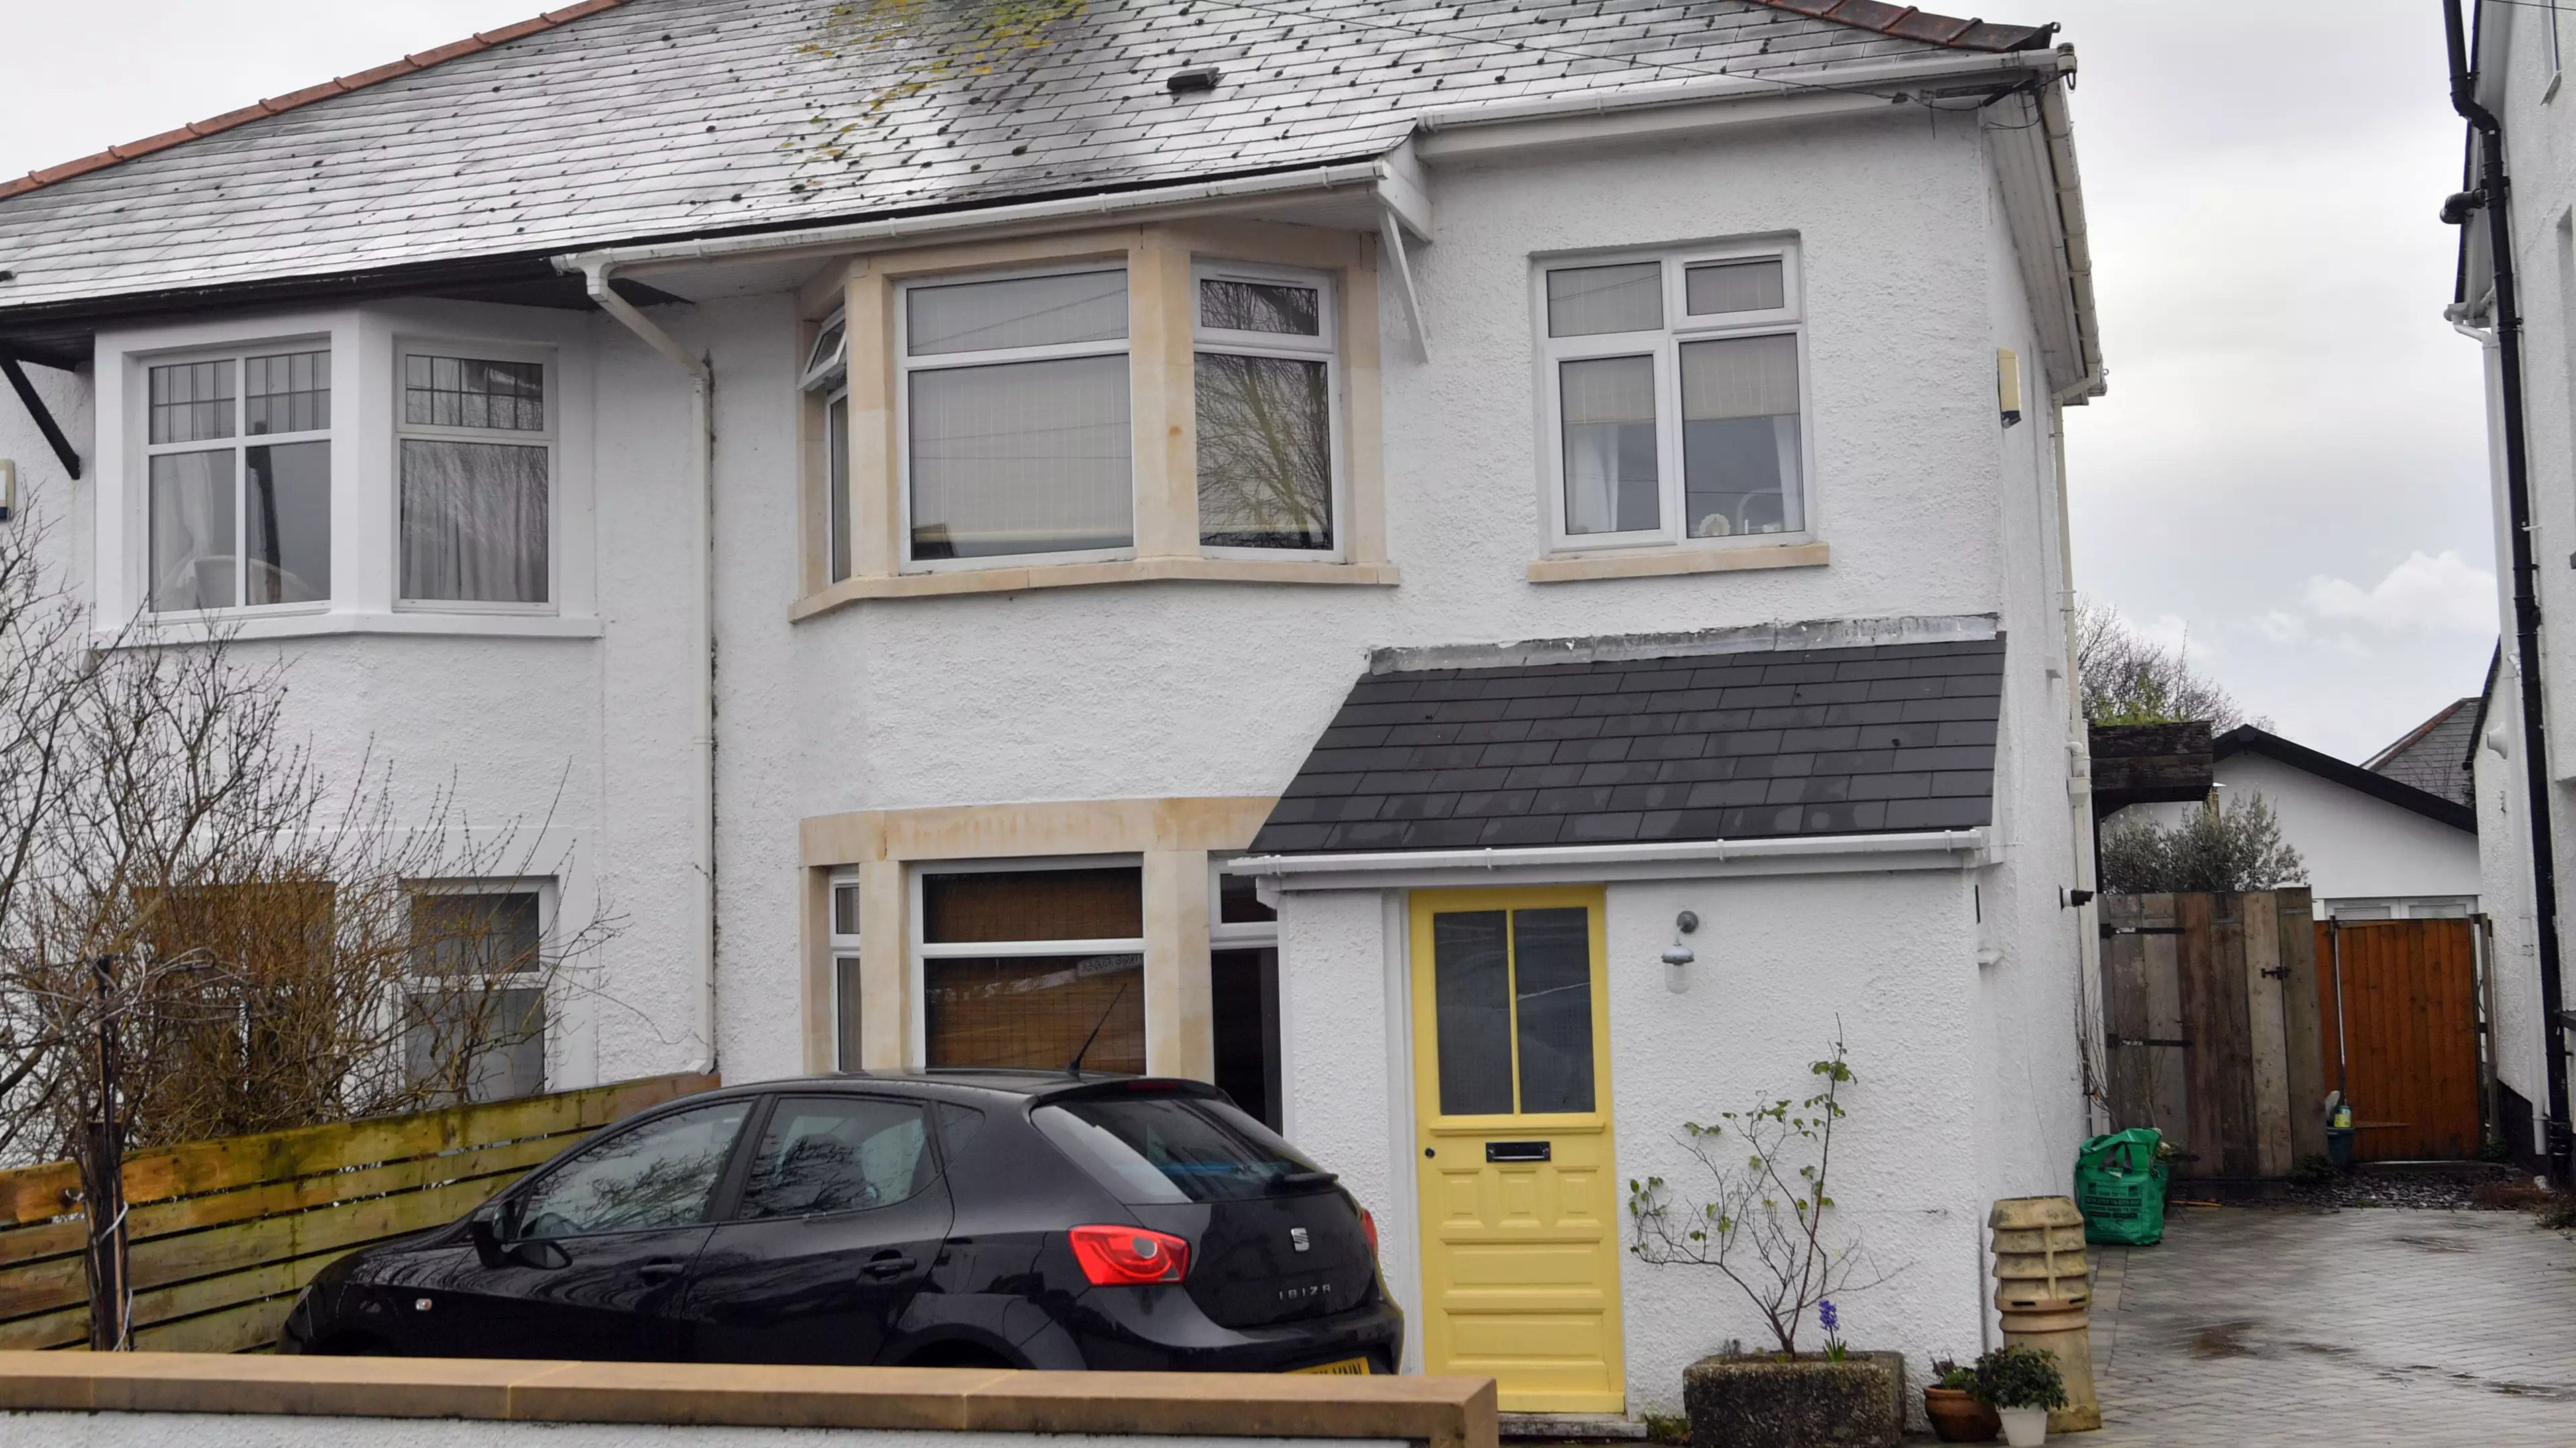 Modest Semi-Detached House Is Named As 'One Of UK's Most Gorgeous Homes' 